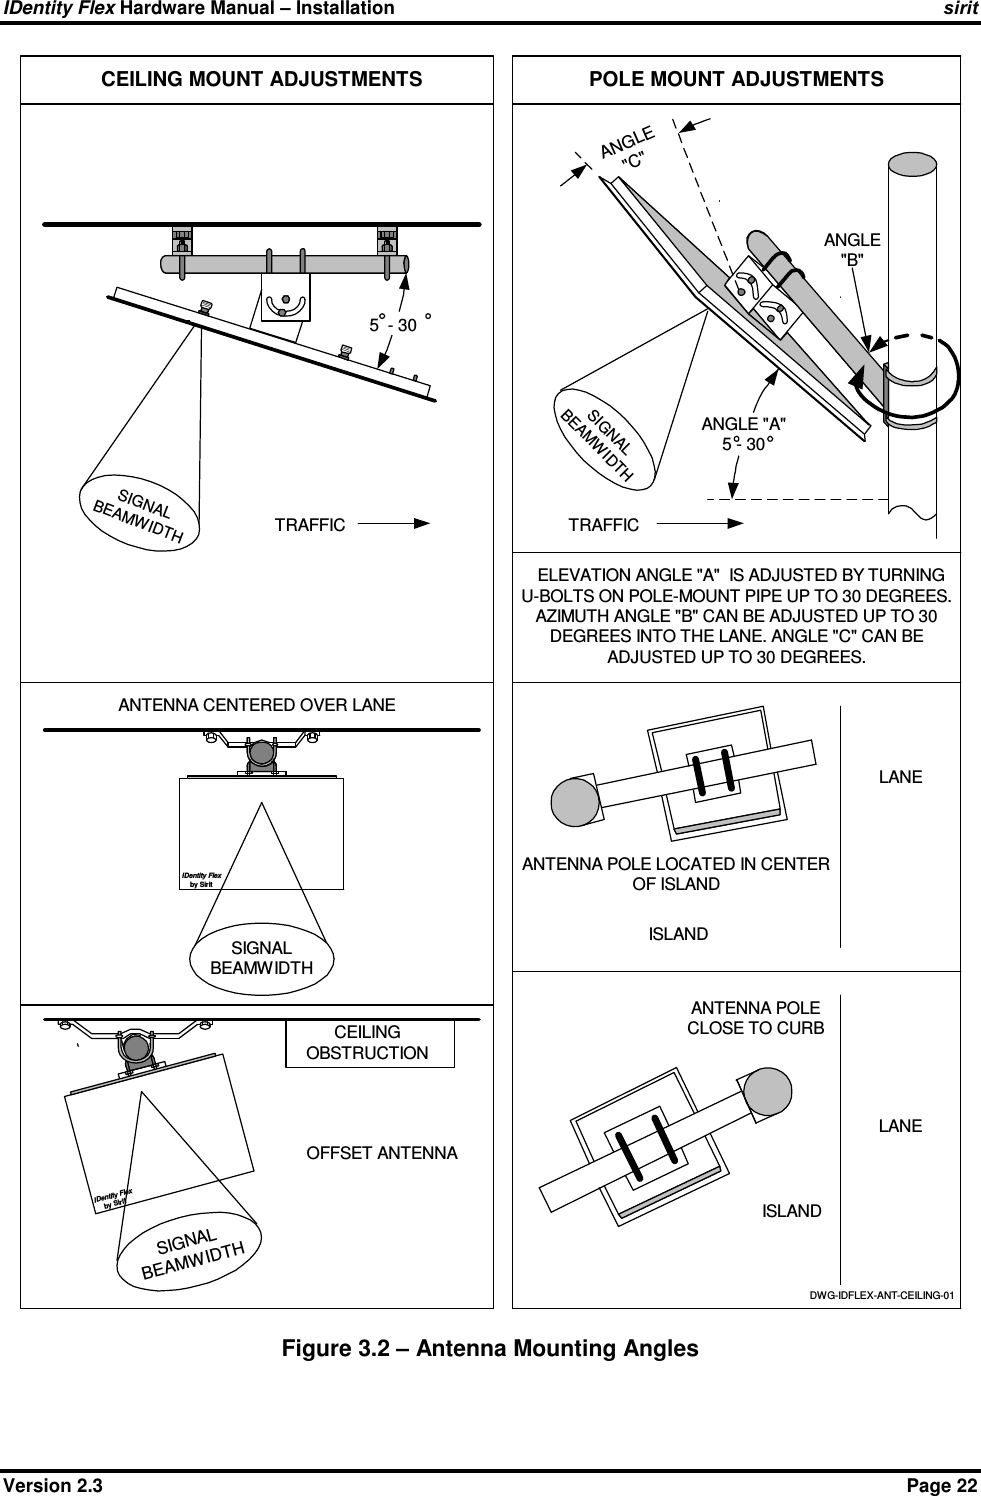 IDentity Flex Hardware Manual – Installation    sirit Version 2.3    Page 22 Figure 3.2 – Antenna Mounting Angles  5  - 30CEILING MOUNT ADJUSTMENTSDWG-IDFLEX-ANT-CEILING-01SIGNALBEAMWIDTHTRAFFICISLANDLANEANGLE&quot;B&quot;ANGLE&quot;C&quot;  ELEVATION ANGLE &quot;A&quot;  IS ADJUSTED BY TURNINGU-BOLTS ON POLE-MOUNT PIPE UP TO 30 DEGREES.AZIMUTH ANGLE &quot;B&quot; CAN BE ADJUSTED UP TO 30DEGREES INTO THE LANE. ANGLE &quot;C&quot; CAN BEADJUSTED UP TO 30 DEGREES.LANEISLANDCEILINGOBSTRUCTIONANTENNA CENTERED OVER LANEOFFSET ANTENNAANTENNA POLECLOSE TO CURBANTENNA POLE LOCATED IN CENTEROF ISLANDSIGNALBEAMWIDTHTRAFFICSIGNALBEAMWIDTHSIGNALBEAMWIDTHPOLE MOUNT ADJUSTMENTSANGLE &quot;A&quot;5 - 30IDentity Flexby SiritIDentity Flexby Sirit